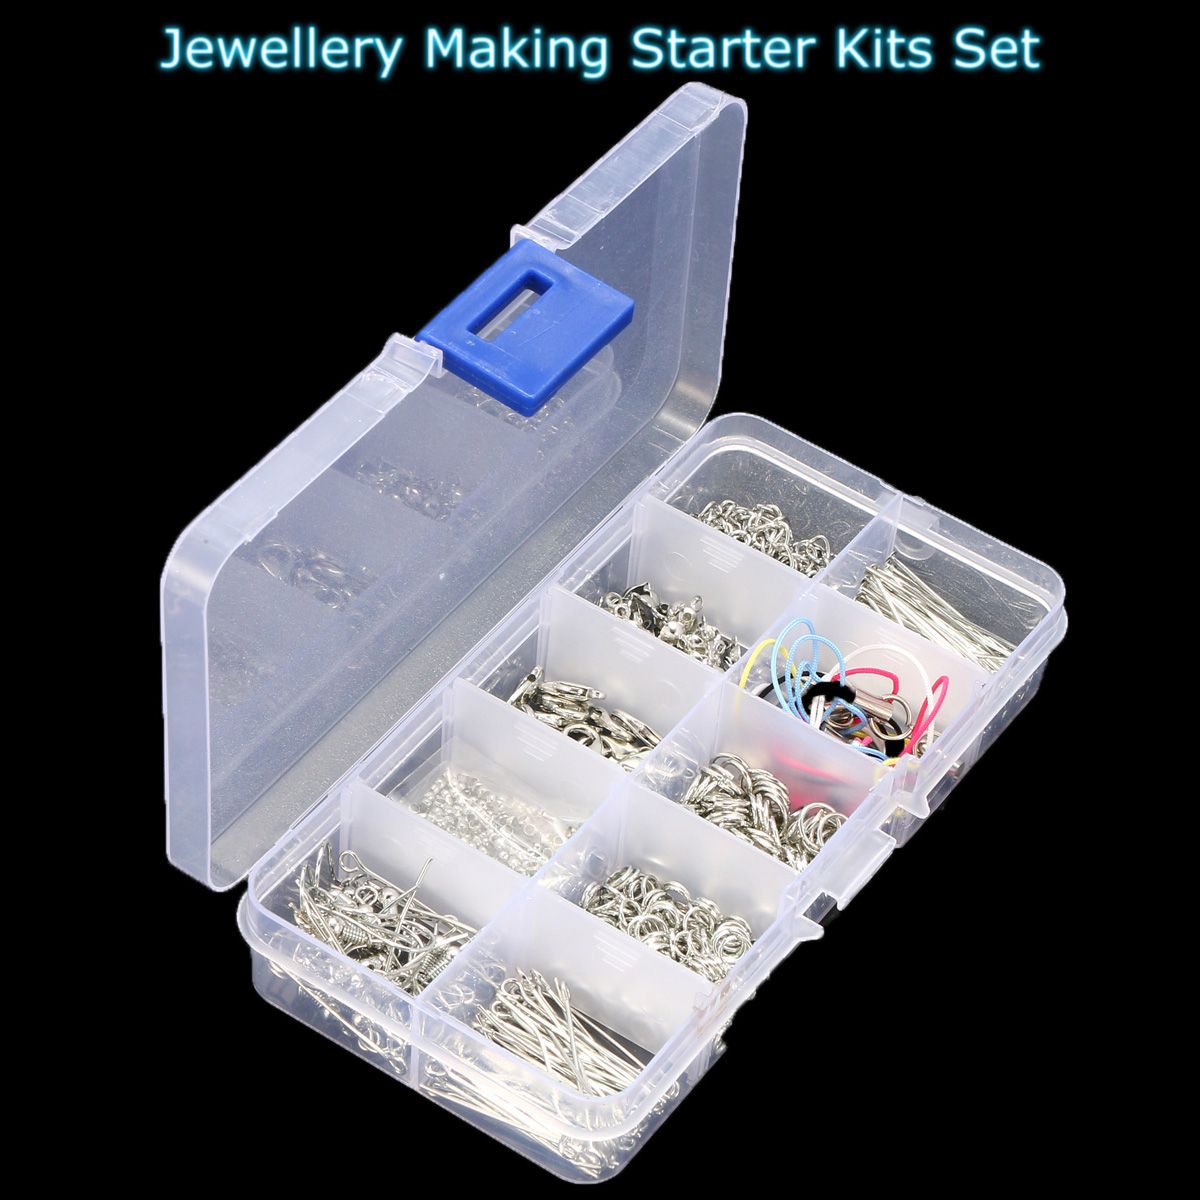 610Pcs-Handmade-Jewelry-Tools-Kits-Head-Pins-Chains-Findings-Accessories-Silver-with-Box-1248053